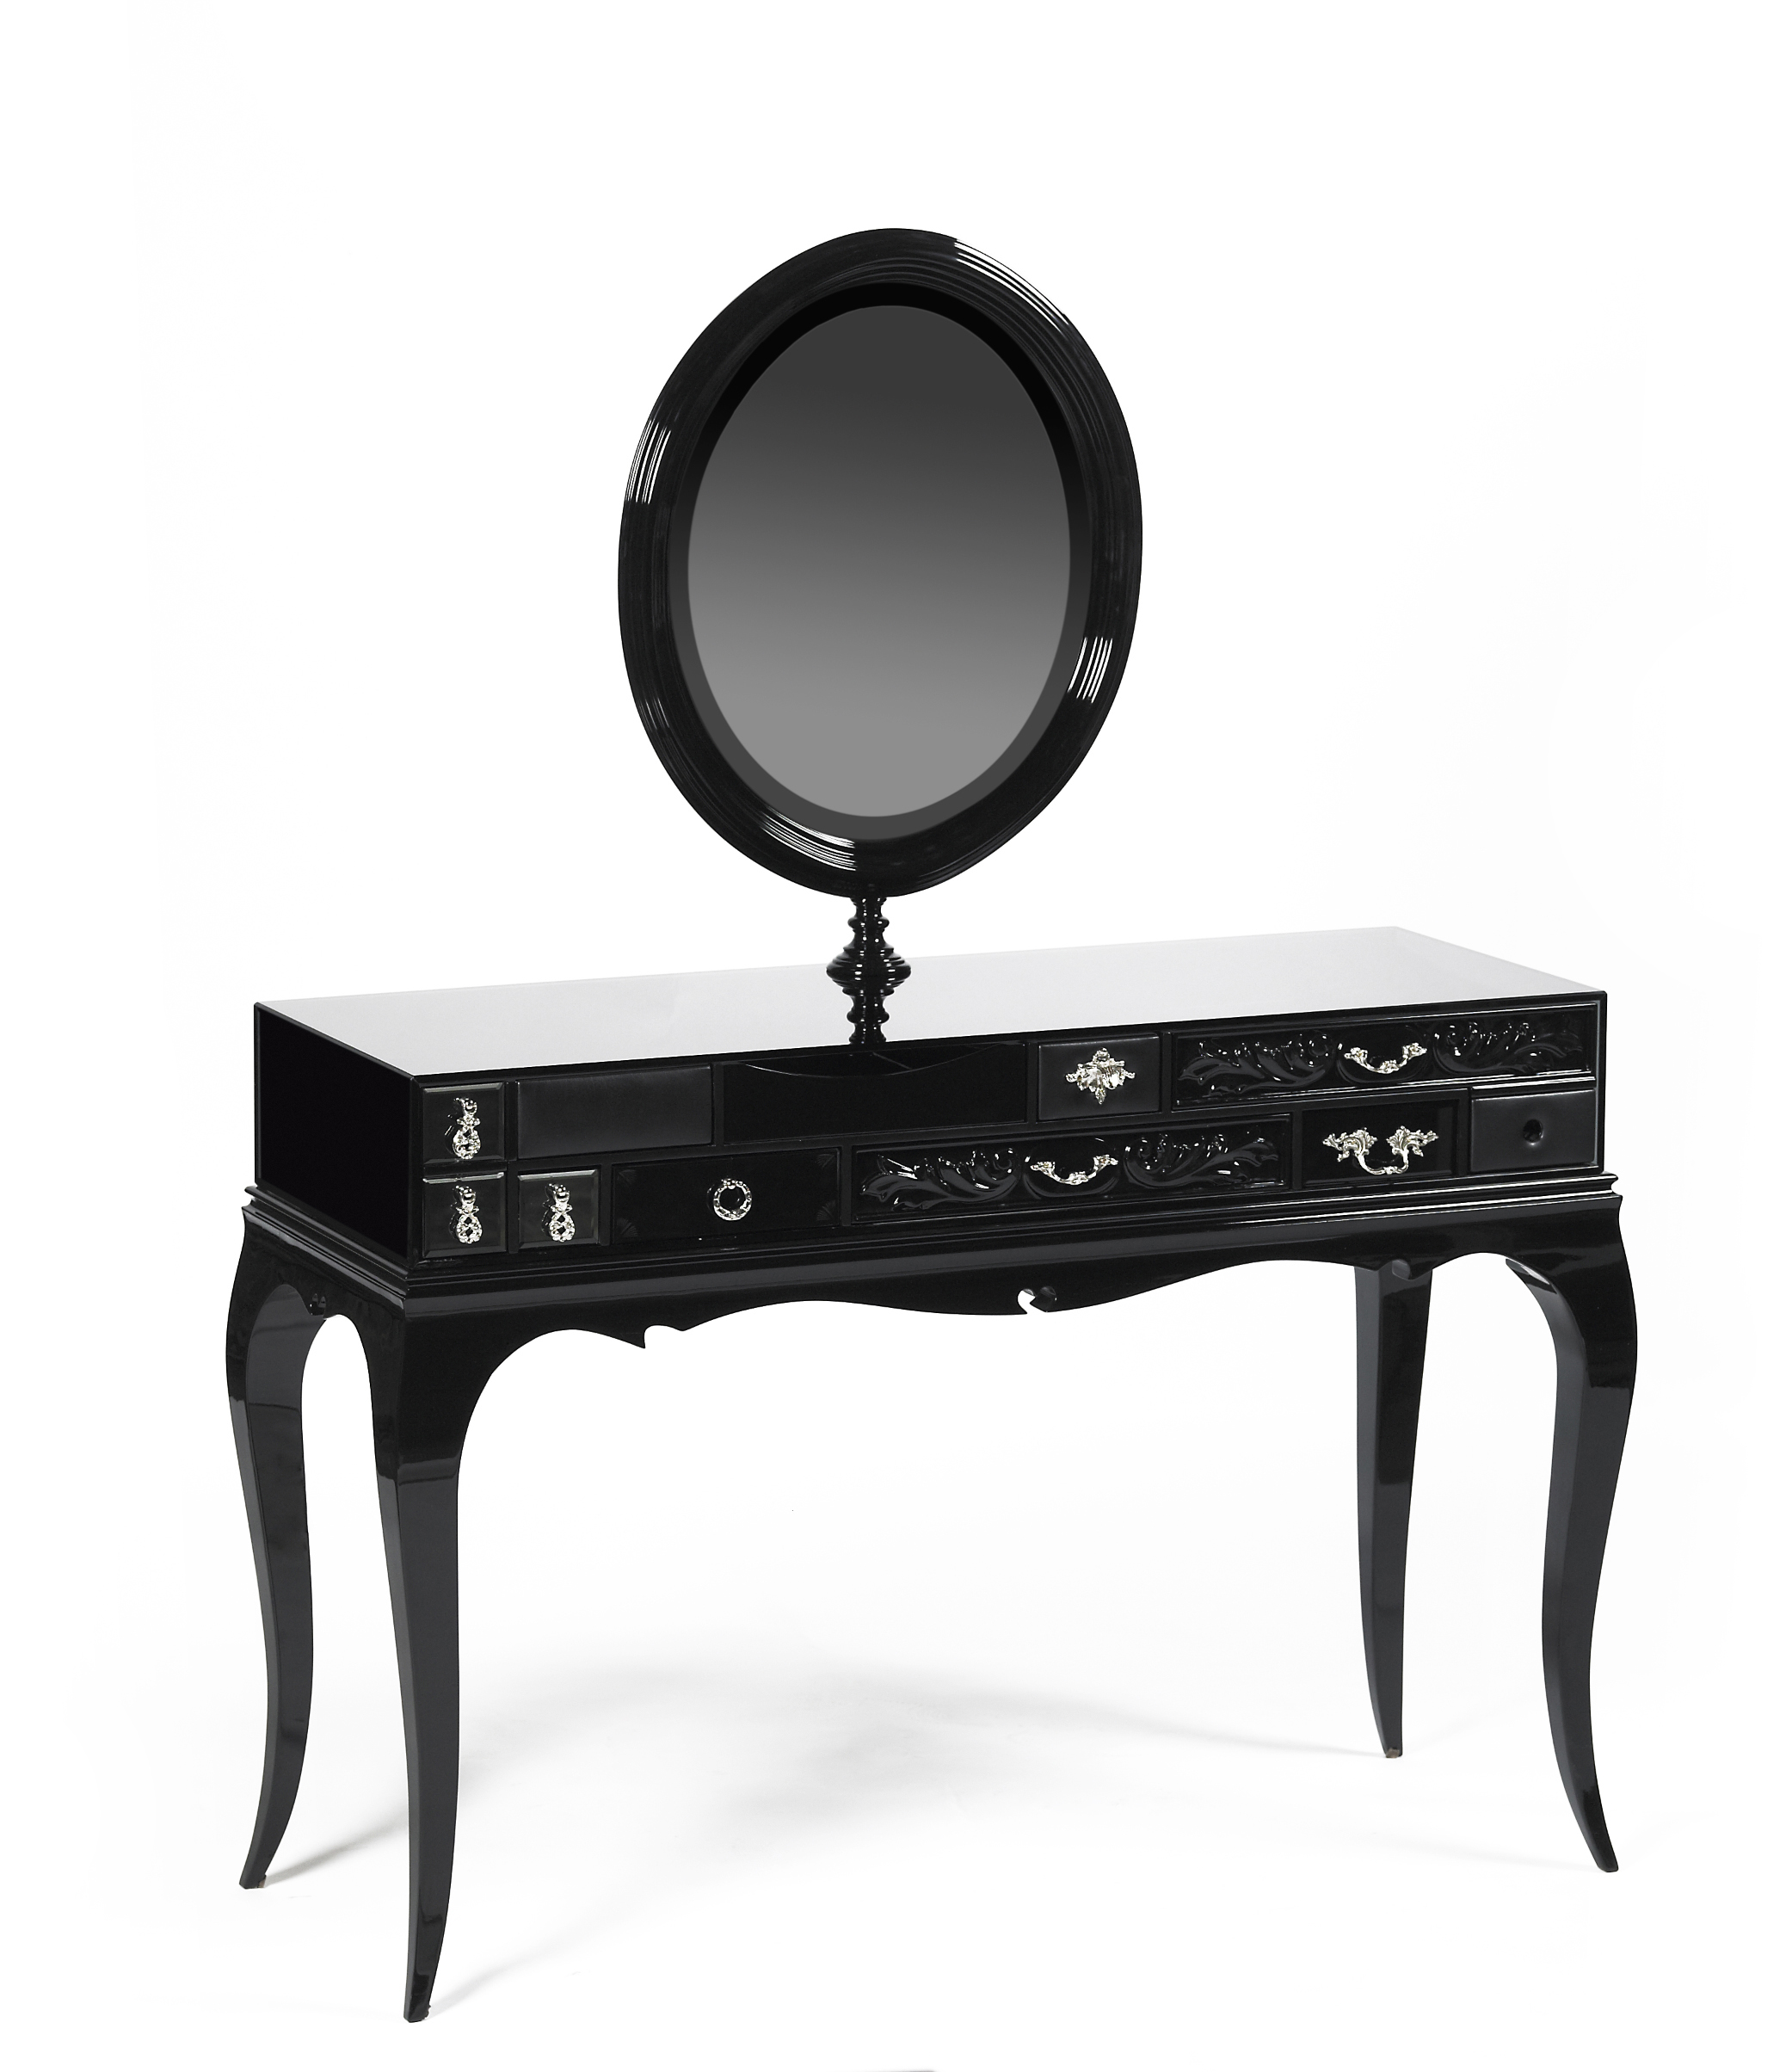 Introducing Glamorous Vanity Tables To Master Bedrooms vanity tables Introducing Glamorous Vanity Tables To Master Bedrooms melrose dressing table 1 HR